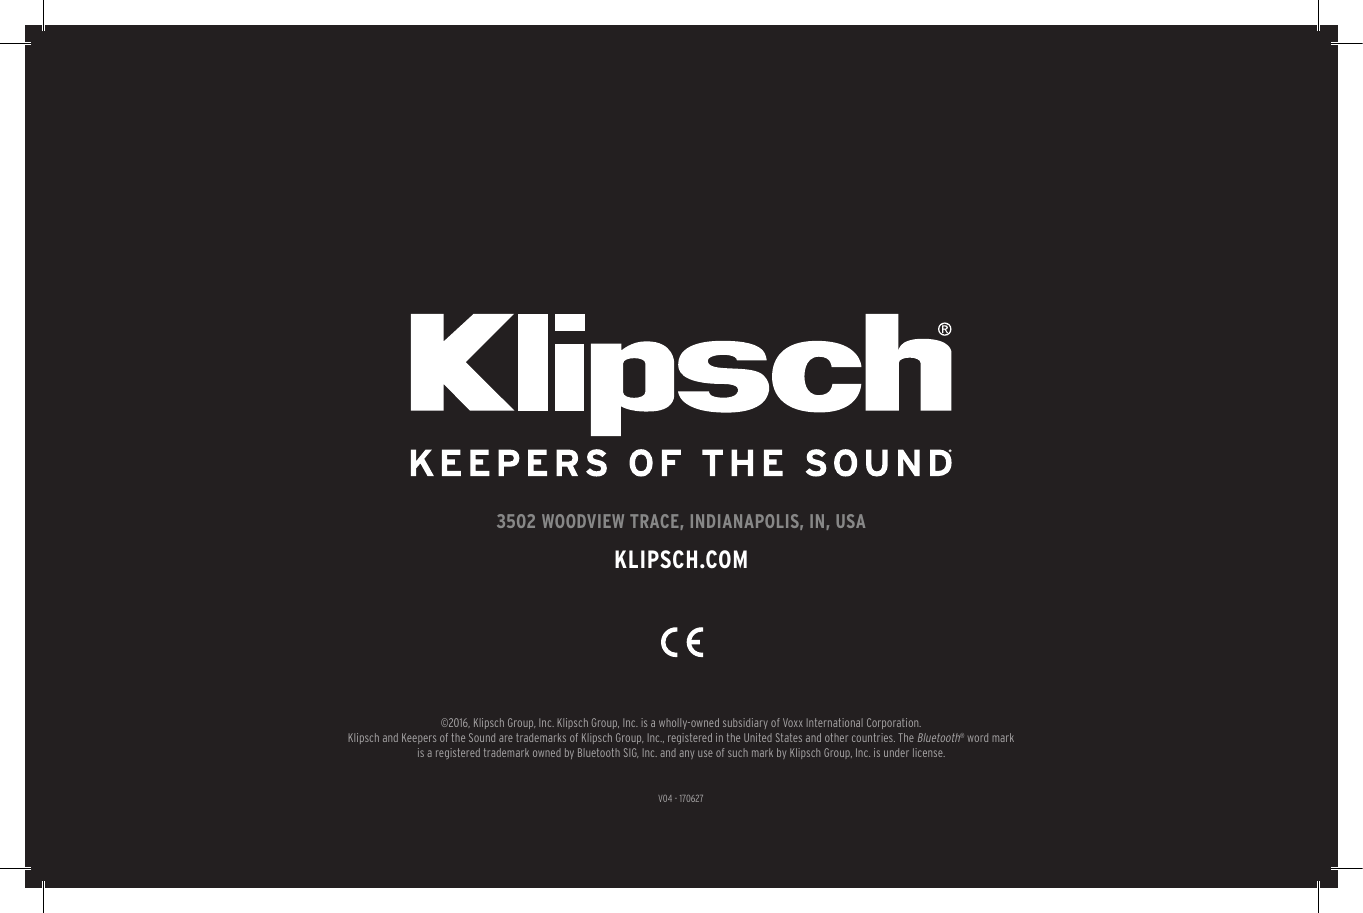 V04 - 1706273502 WOODVIEW TRACE, INDIANAPOLIS, IN, USAKLIPSCH.COM©2016, Klipsch Group, Inc. Klipsch Group, Inc. is a wholly-owned subsidiary of Voxx International Corporation.Klipsch and Keepers of the Sound are trademarks of Klipsch Group, Inc., registered in the United States and other countries. The Bluetooth® word mark is a registered trademark owned by Bluetooth SIG, Inc. and any use of such mark by Klipsch Group, Inc. is under license. 